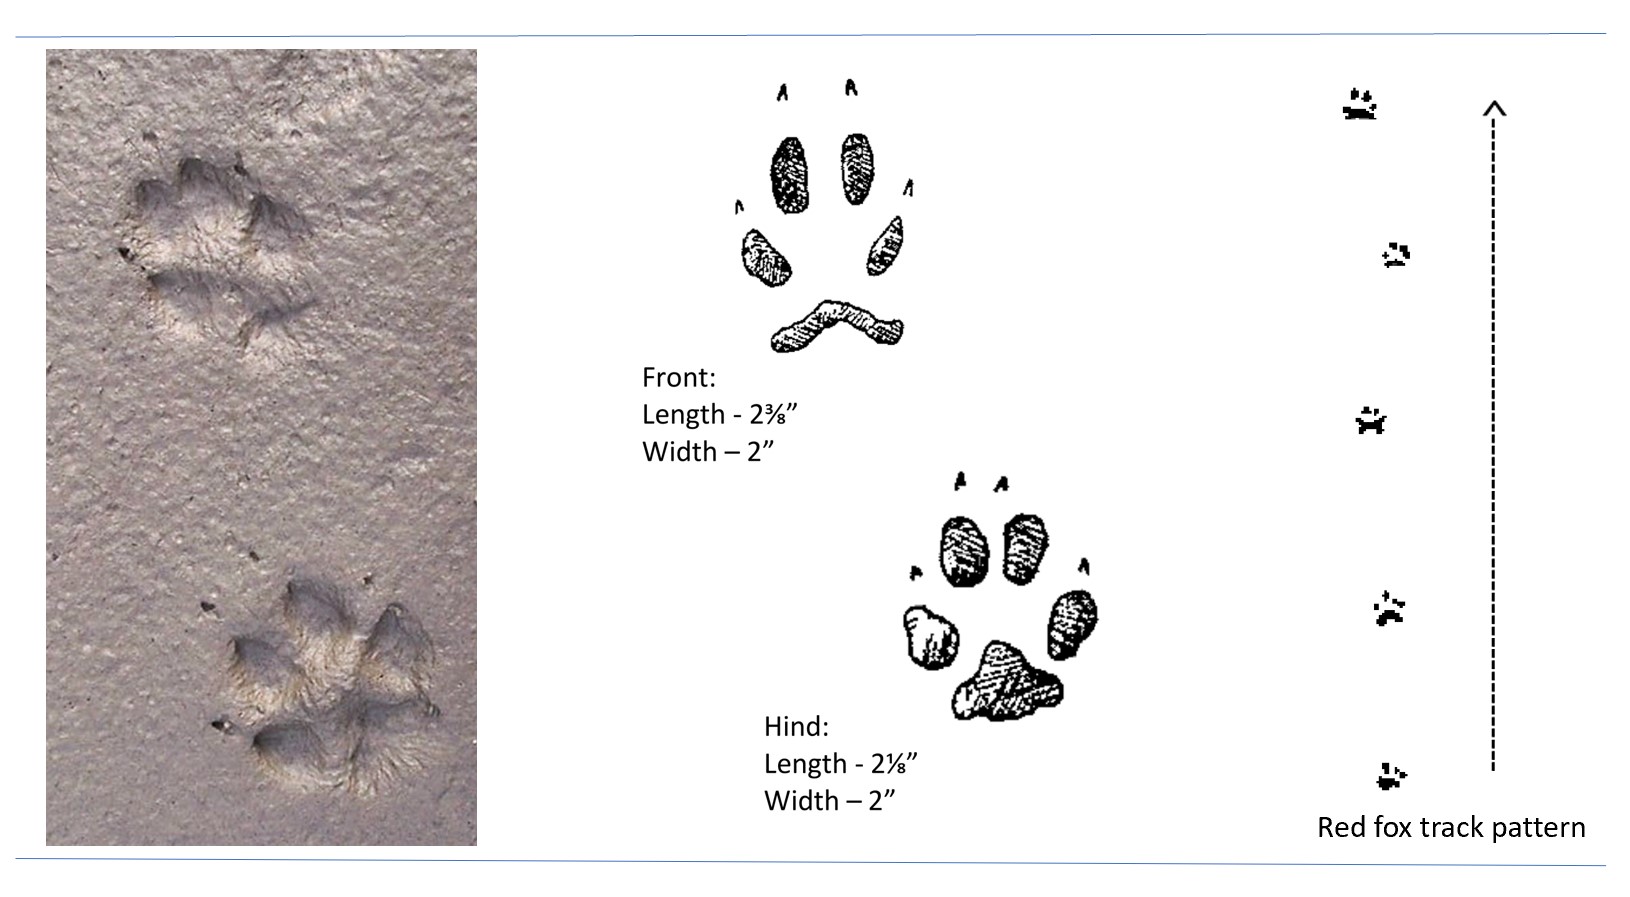 Photo and illustrated tracks of a red fox.